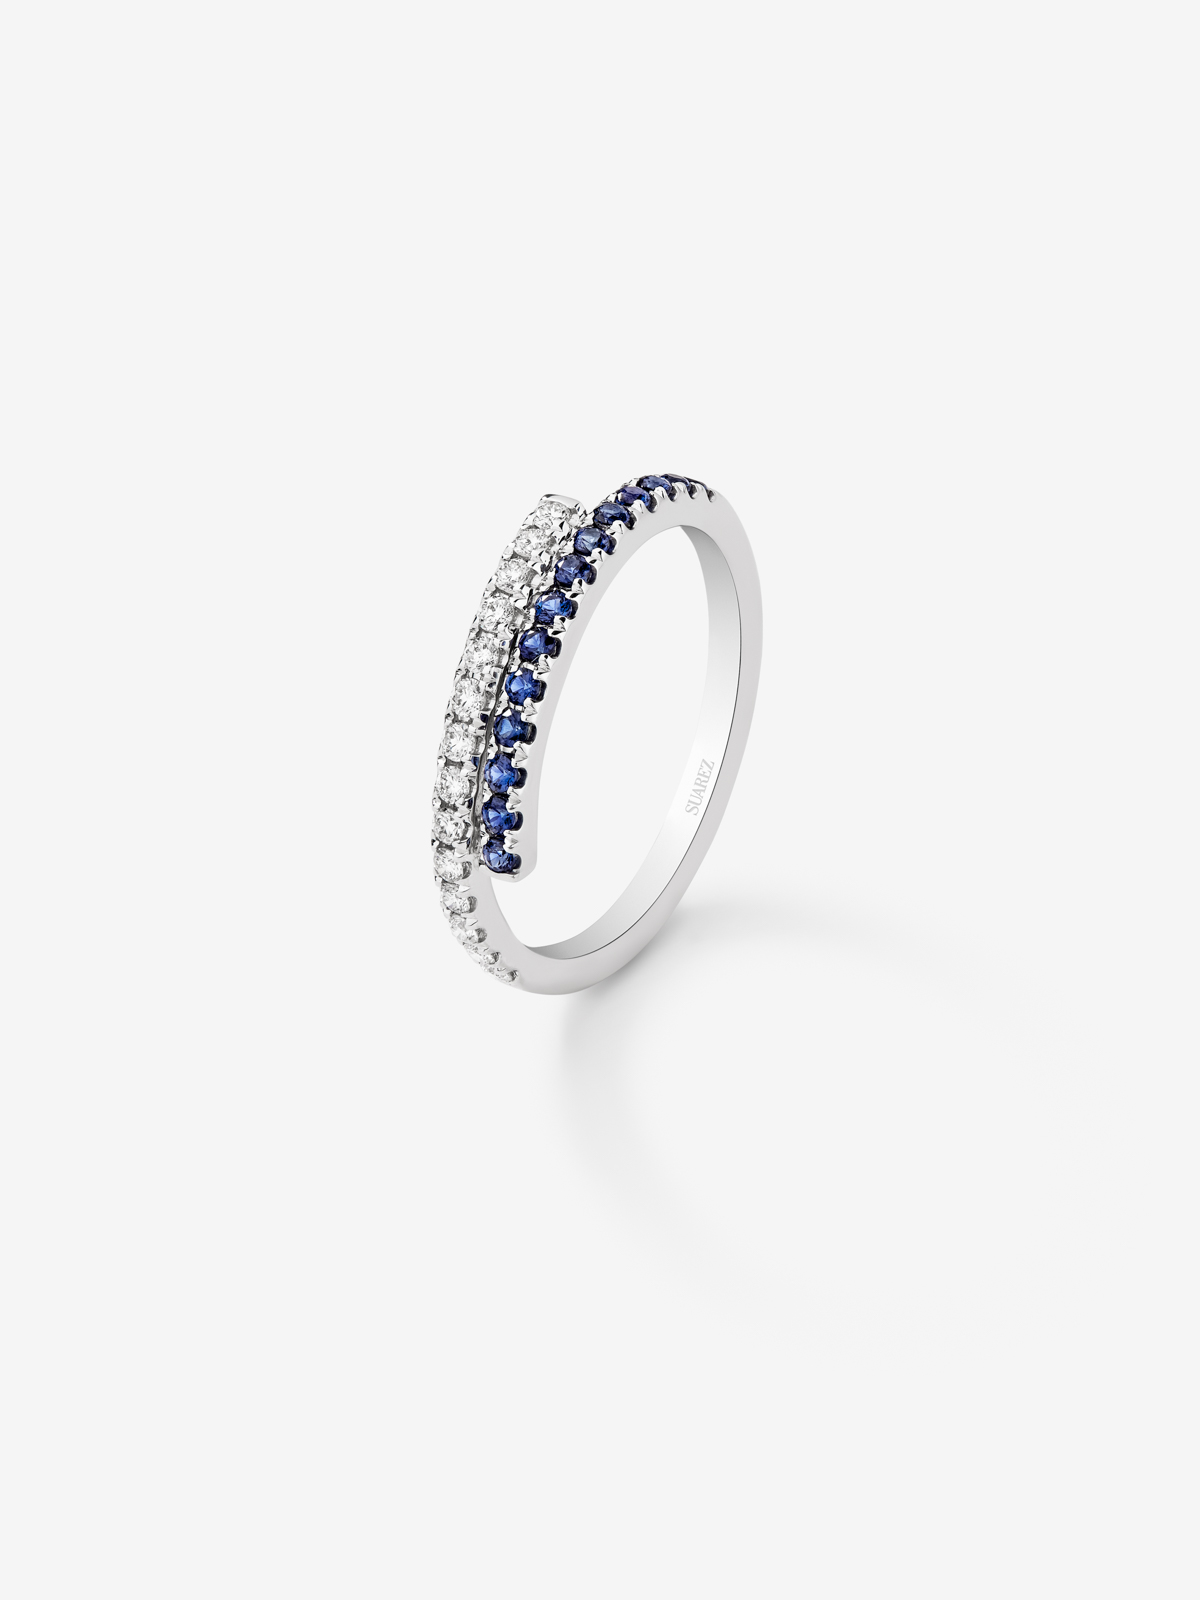 Media Open 18k White Gold Alliance with Diamonds and Blue Sapphires